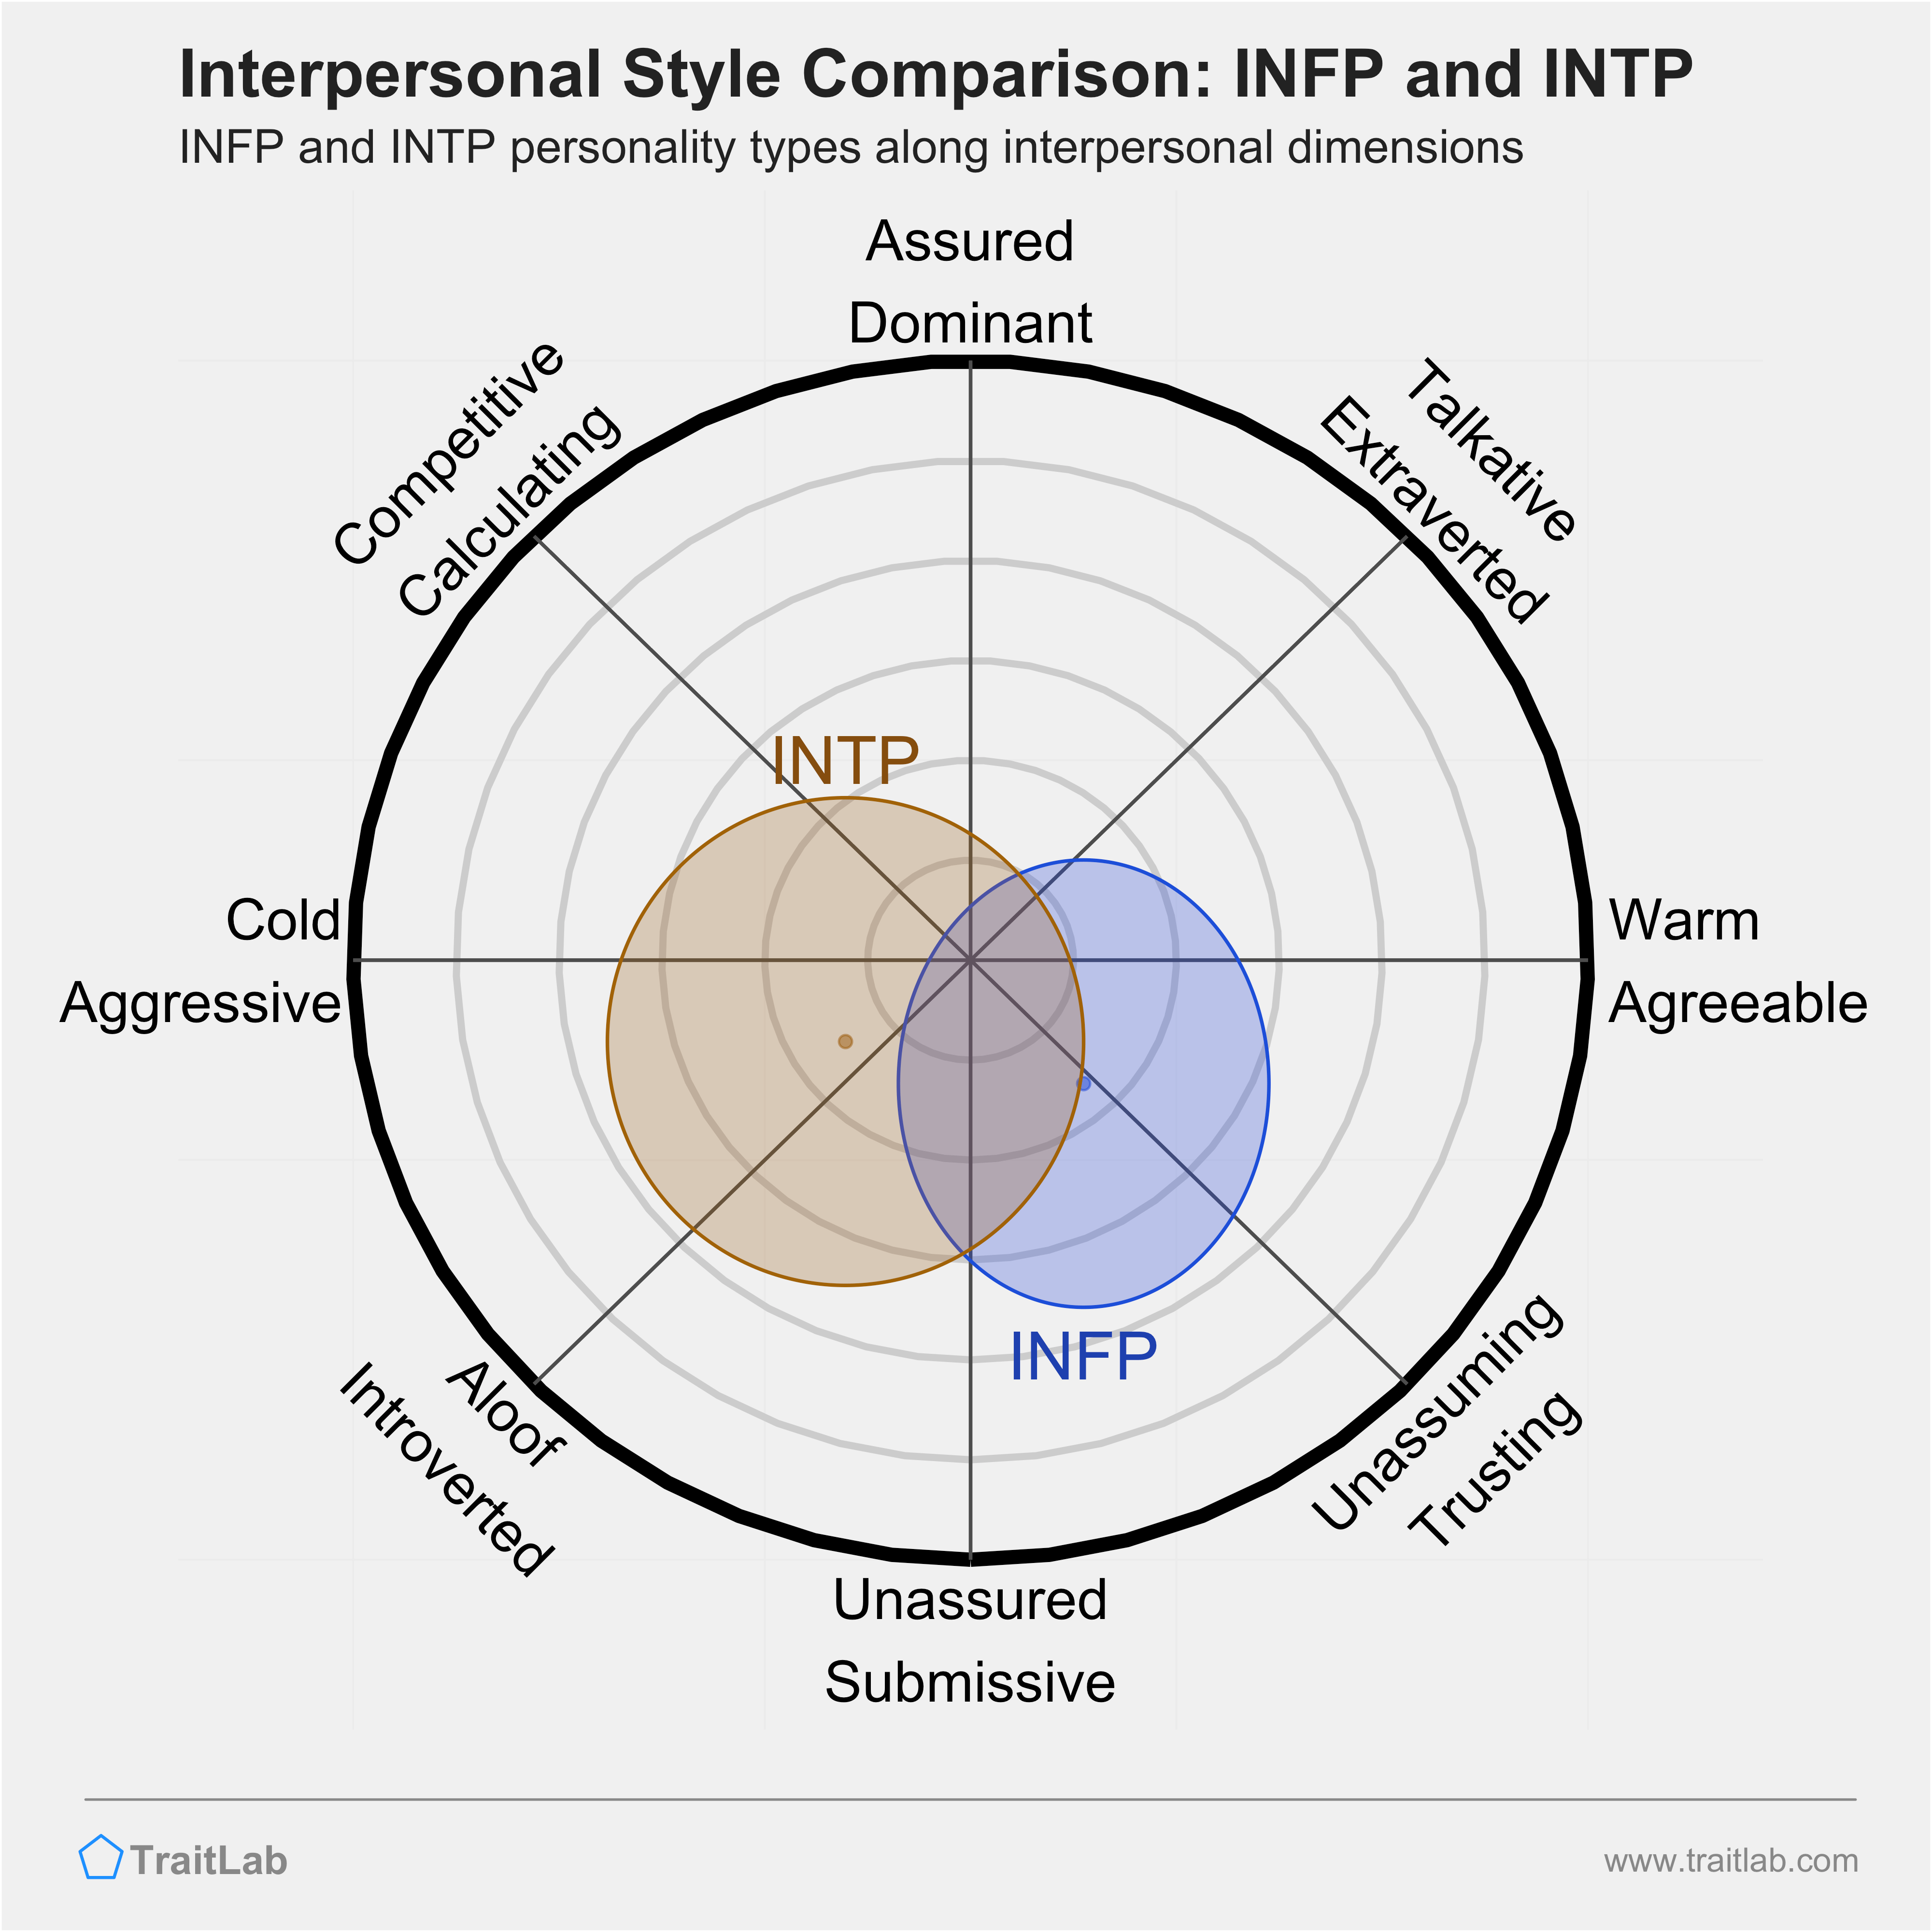 INFP and INTP comparison across interpersonal dimensions